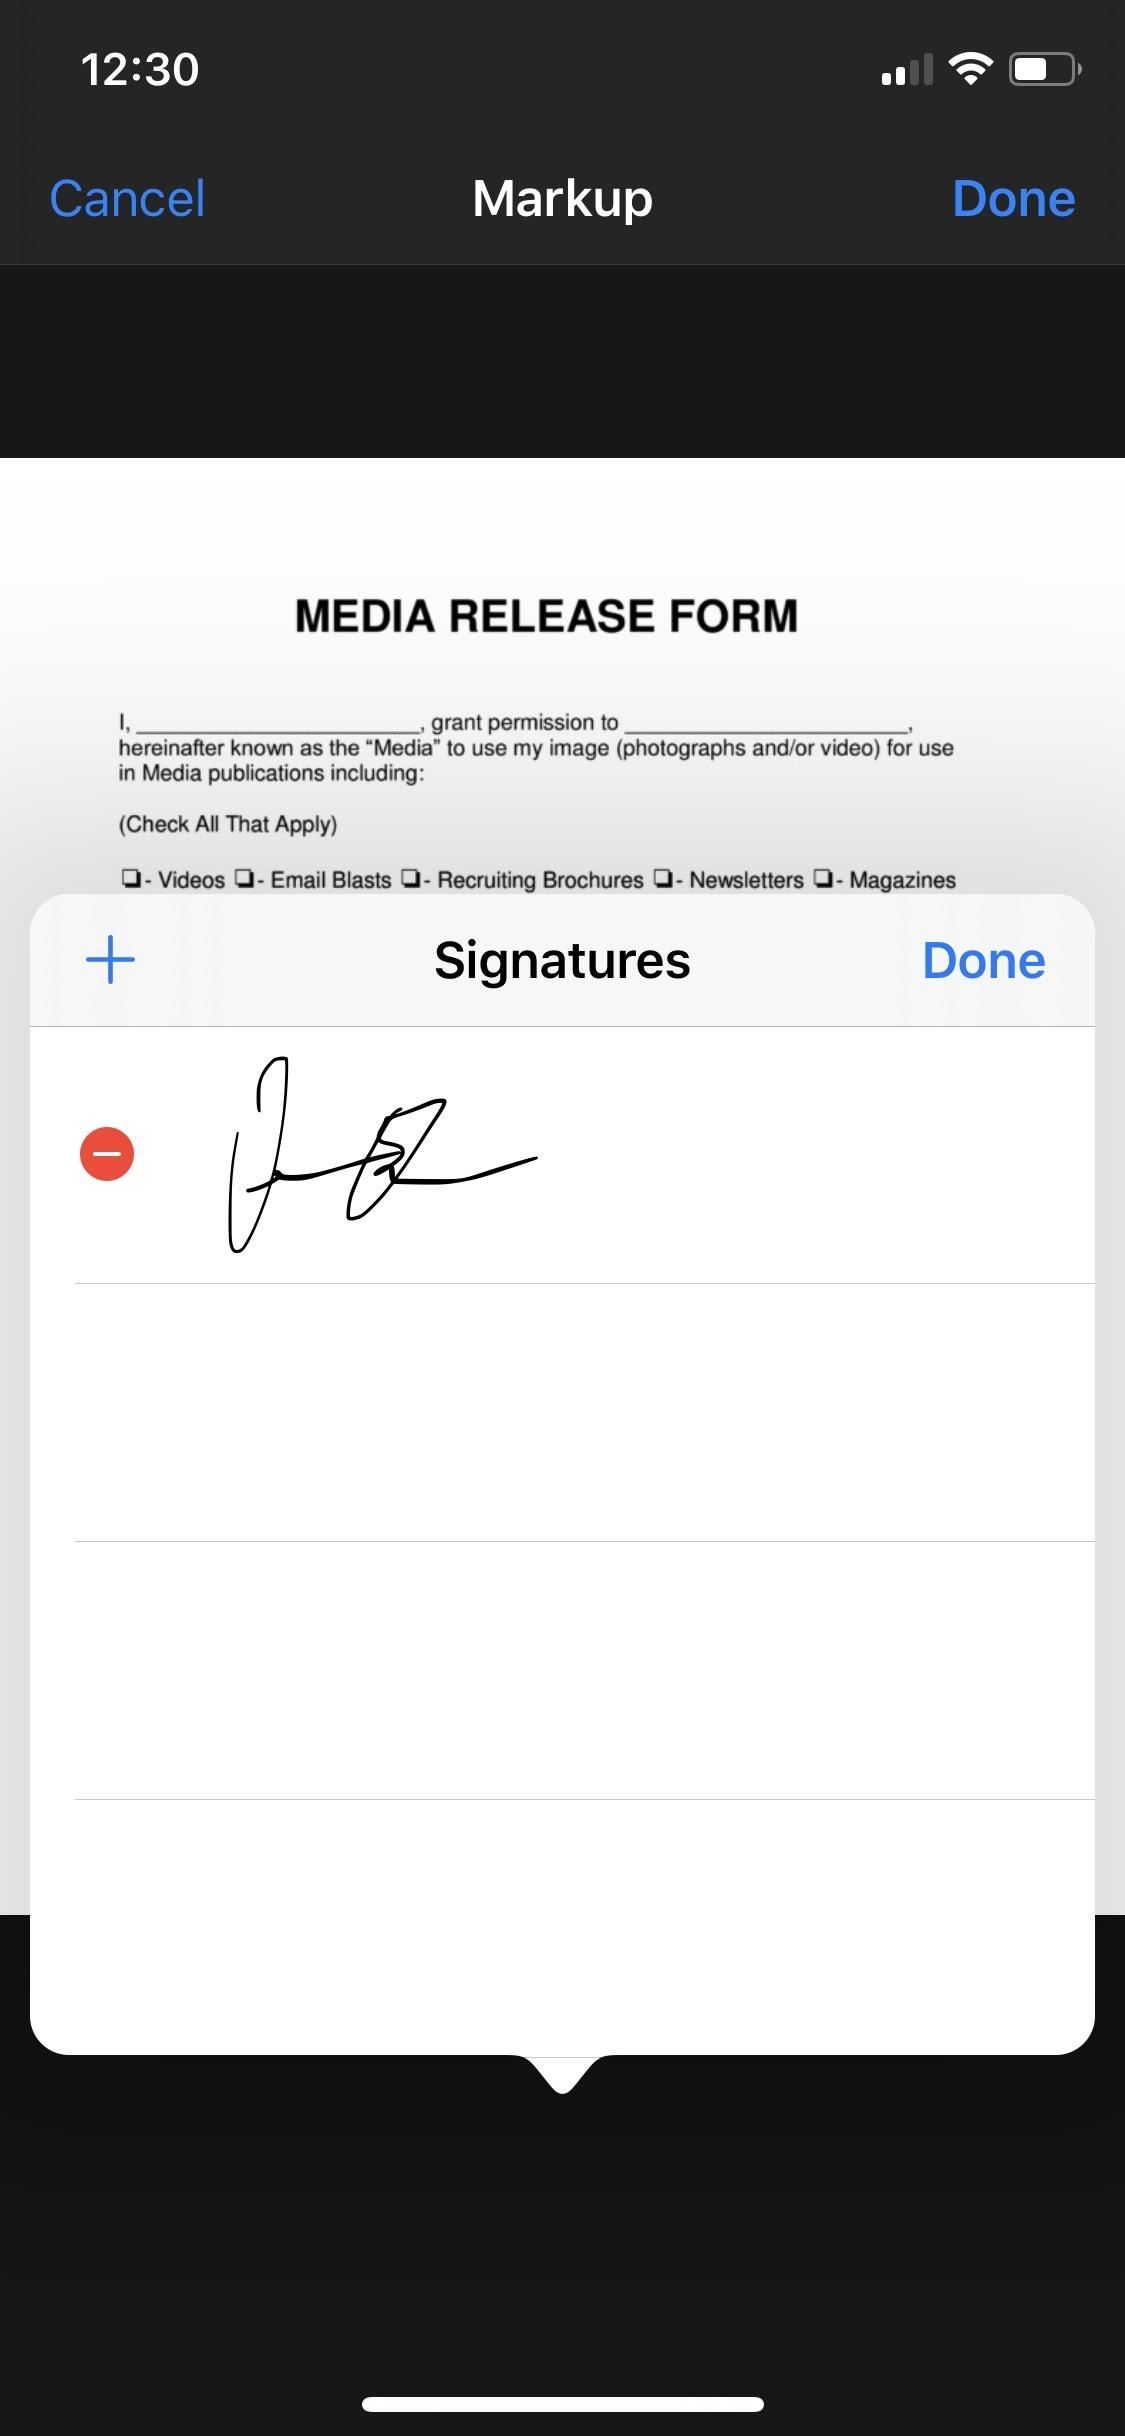 How to Set Up Your Signature in Apple's Markup & Make It Easy to Sign Forms on Your iPhone